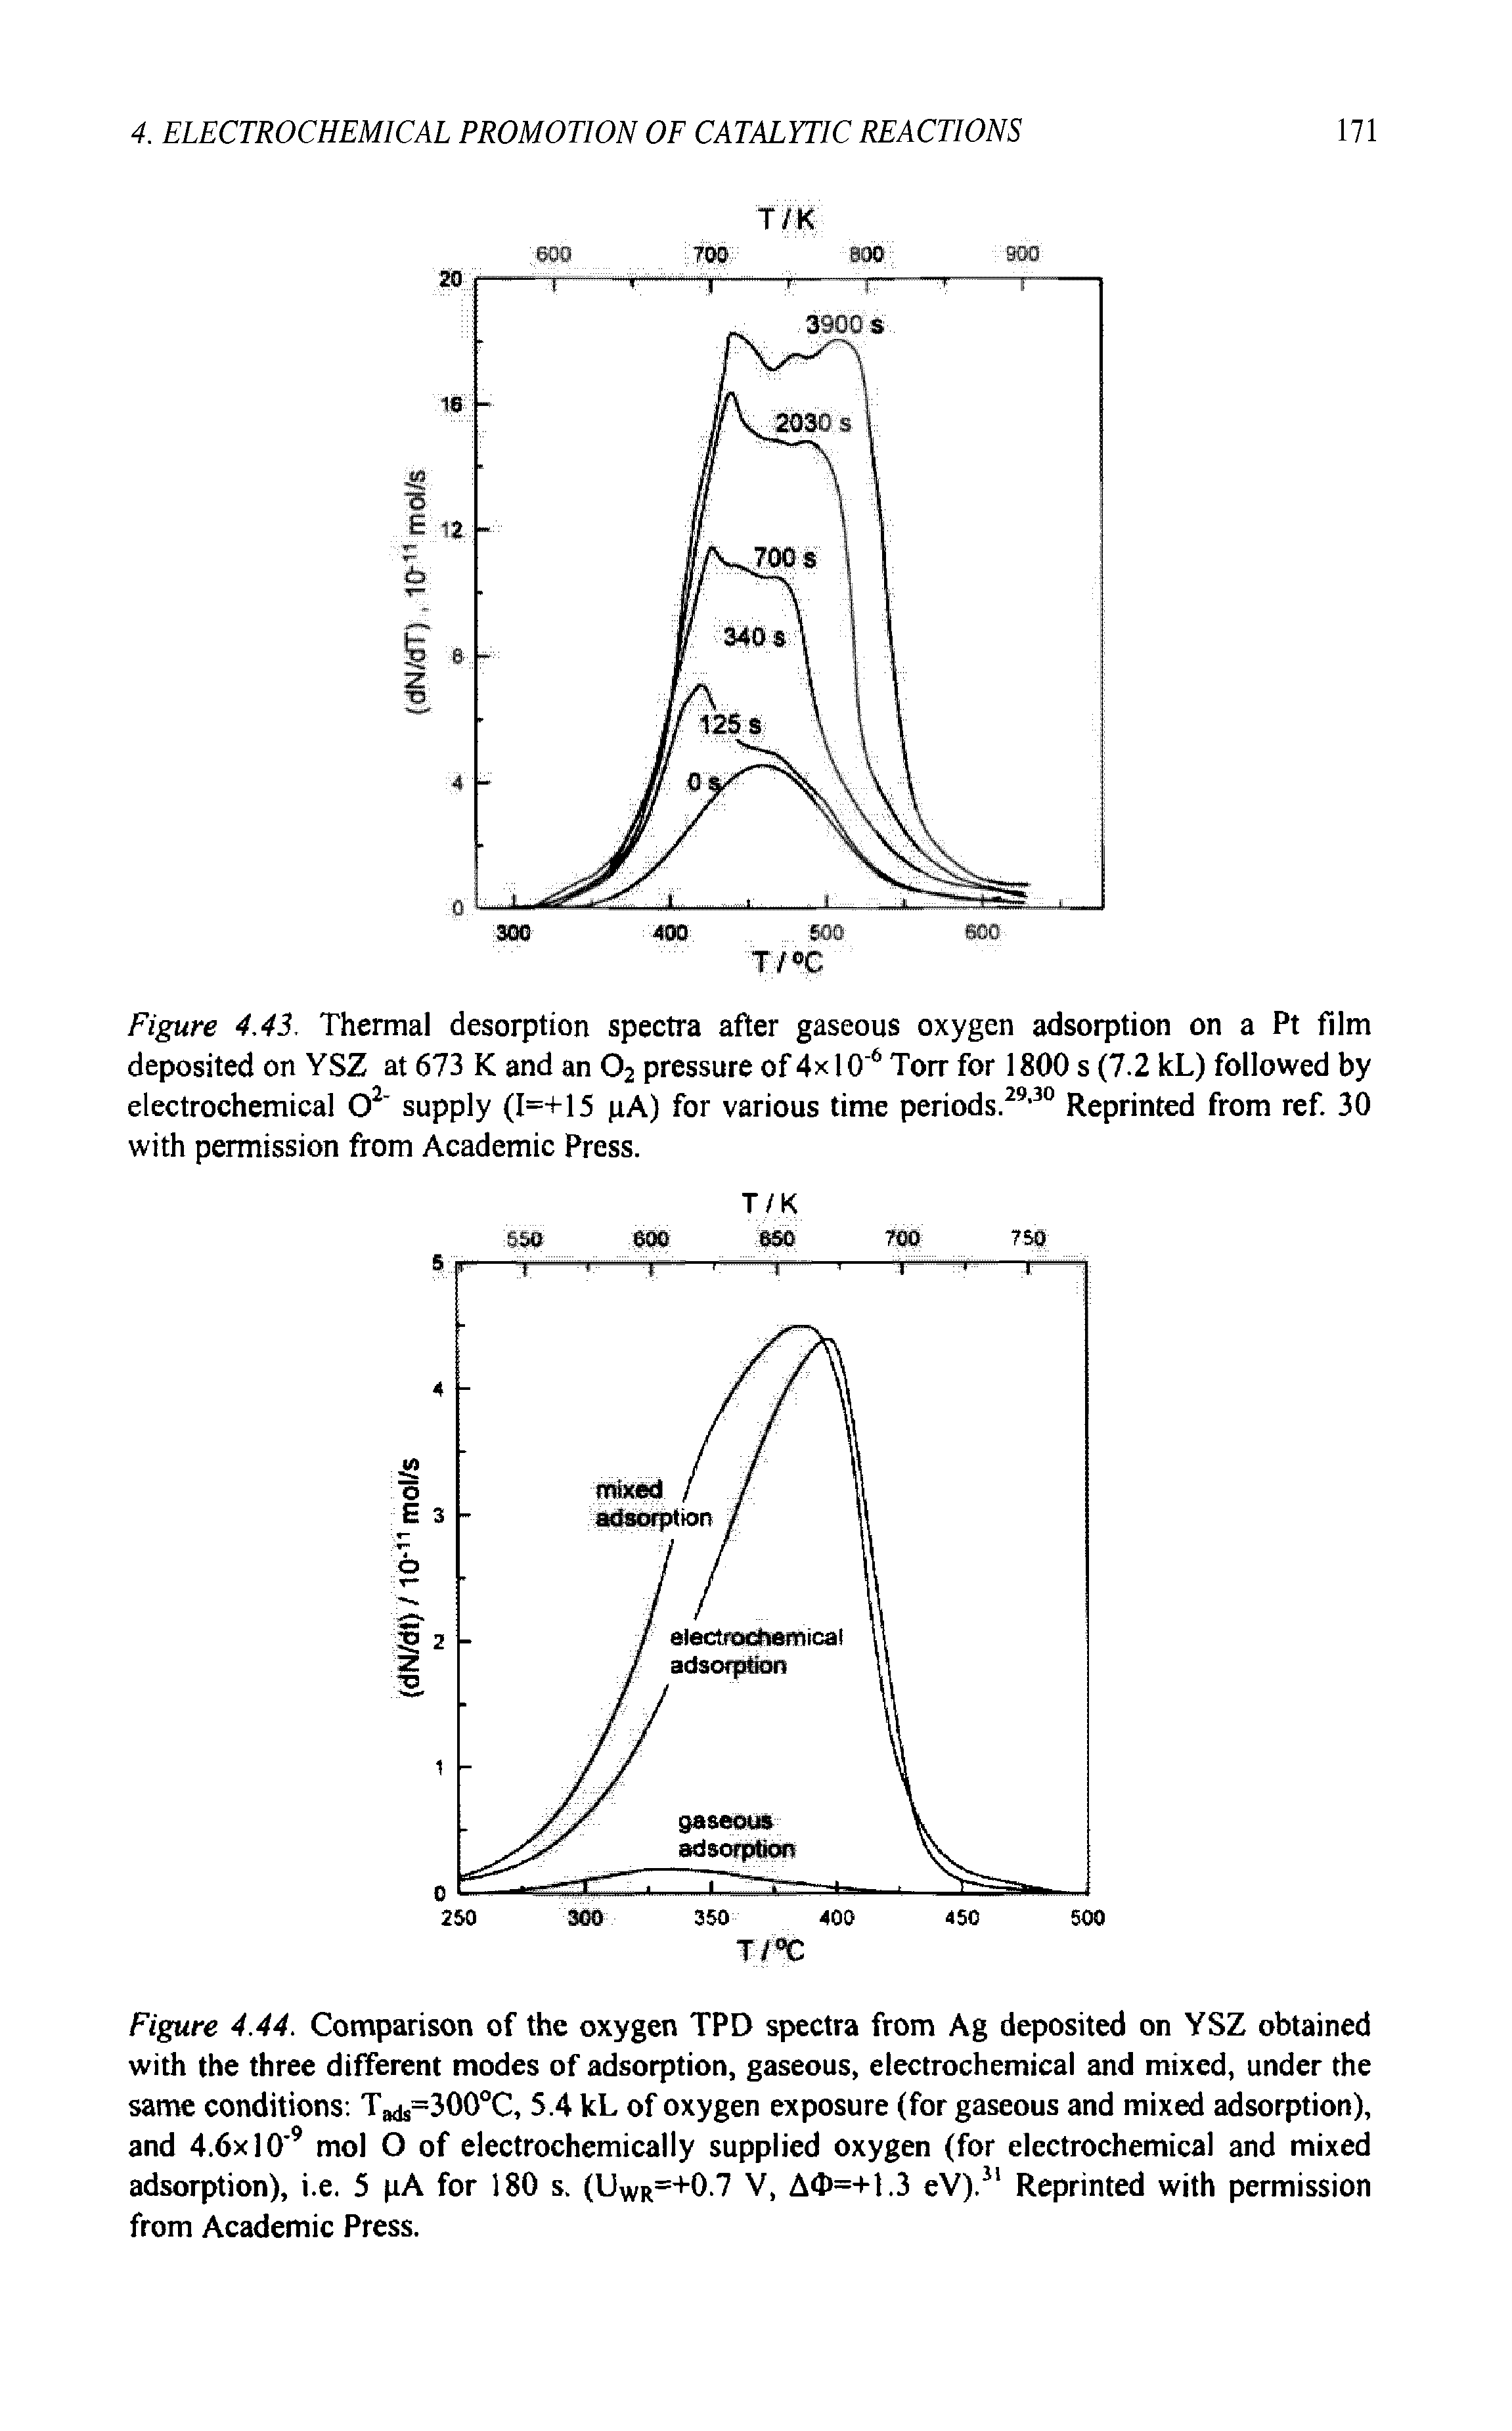 Figure 4.43. Thermal desorption spectra after gaseous oxygen adsorption on a Pt film deposited on YSZ at 673 K and an 02 pressure of 4x 10"6 Torr for 1800 s (7.2 kL) followed by electrochemical O2 supply (I=+15 pA) for various time periods.29-30 Reprinted from ref. 30 with permission from Academic Press.